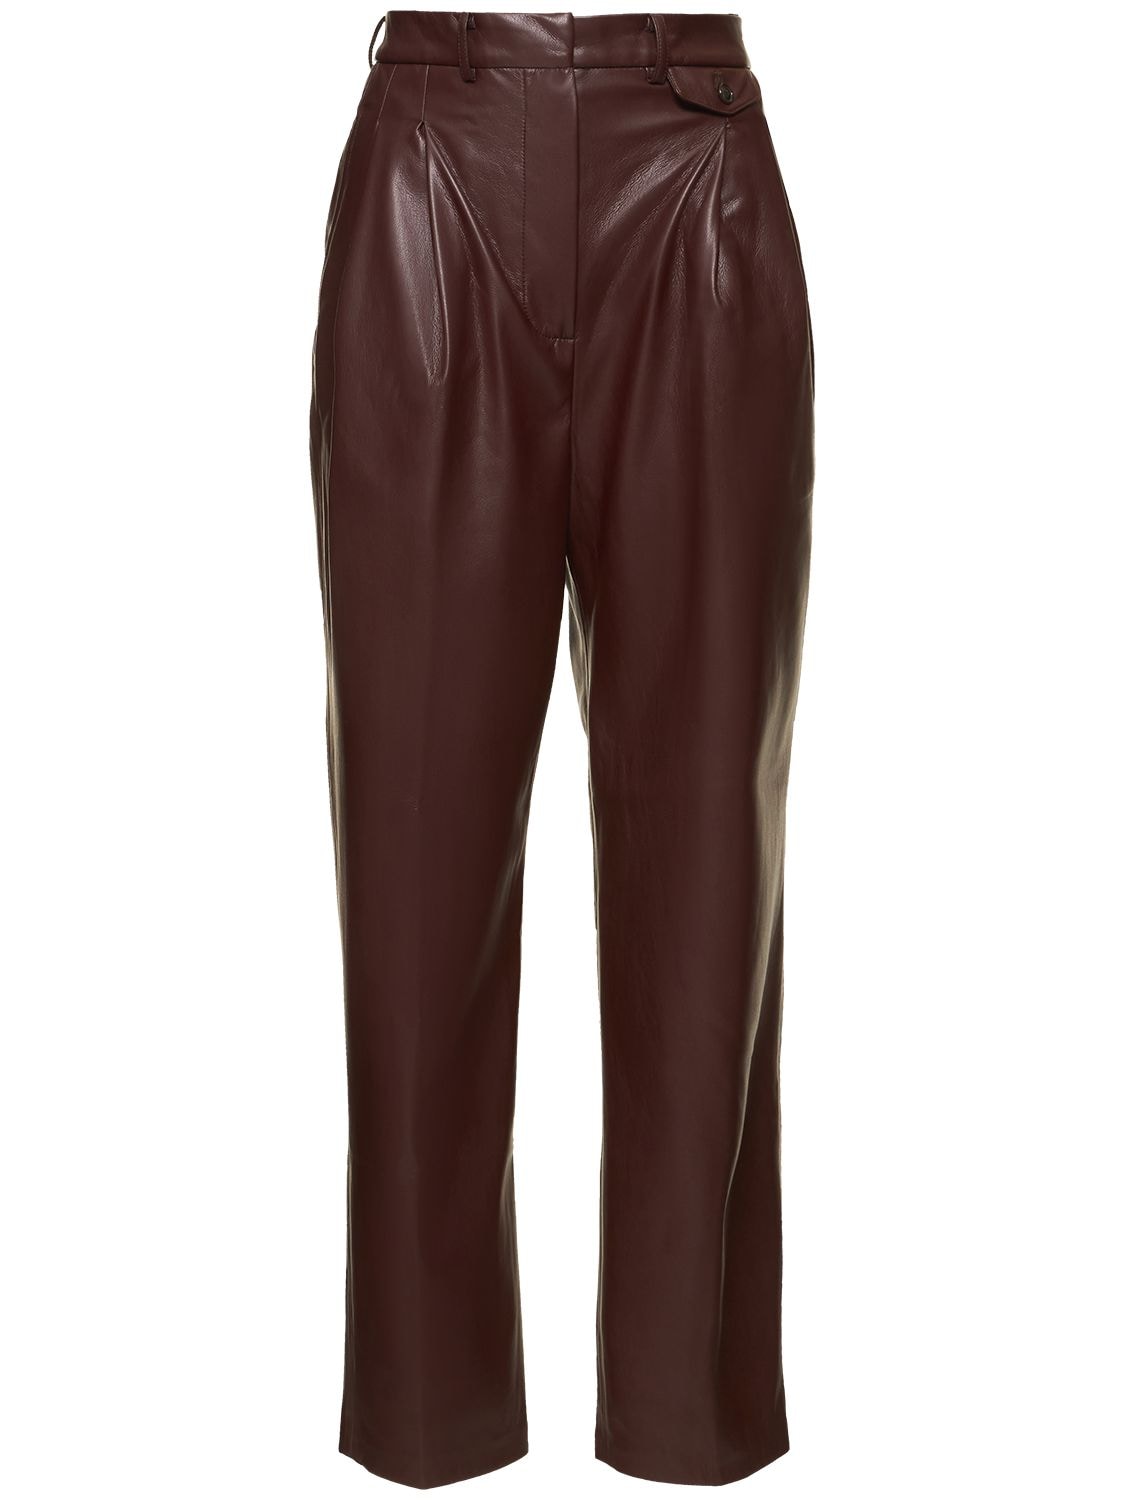 THE FRANKIE SHOP PERNILLE FAUX LEATHER PANTS